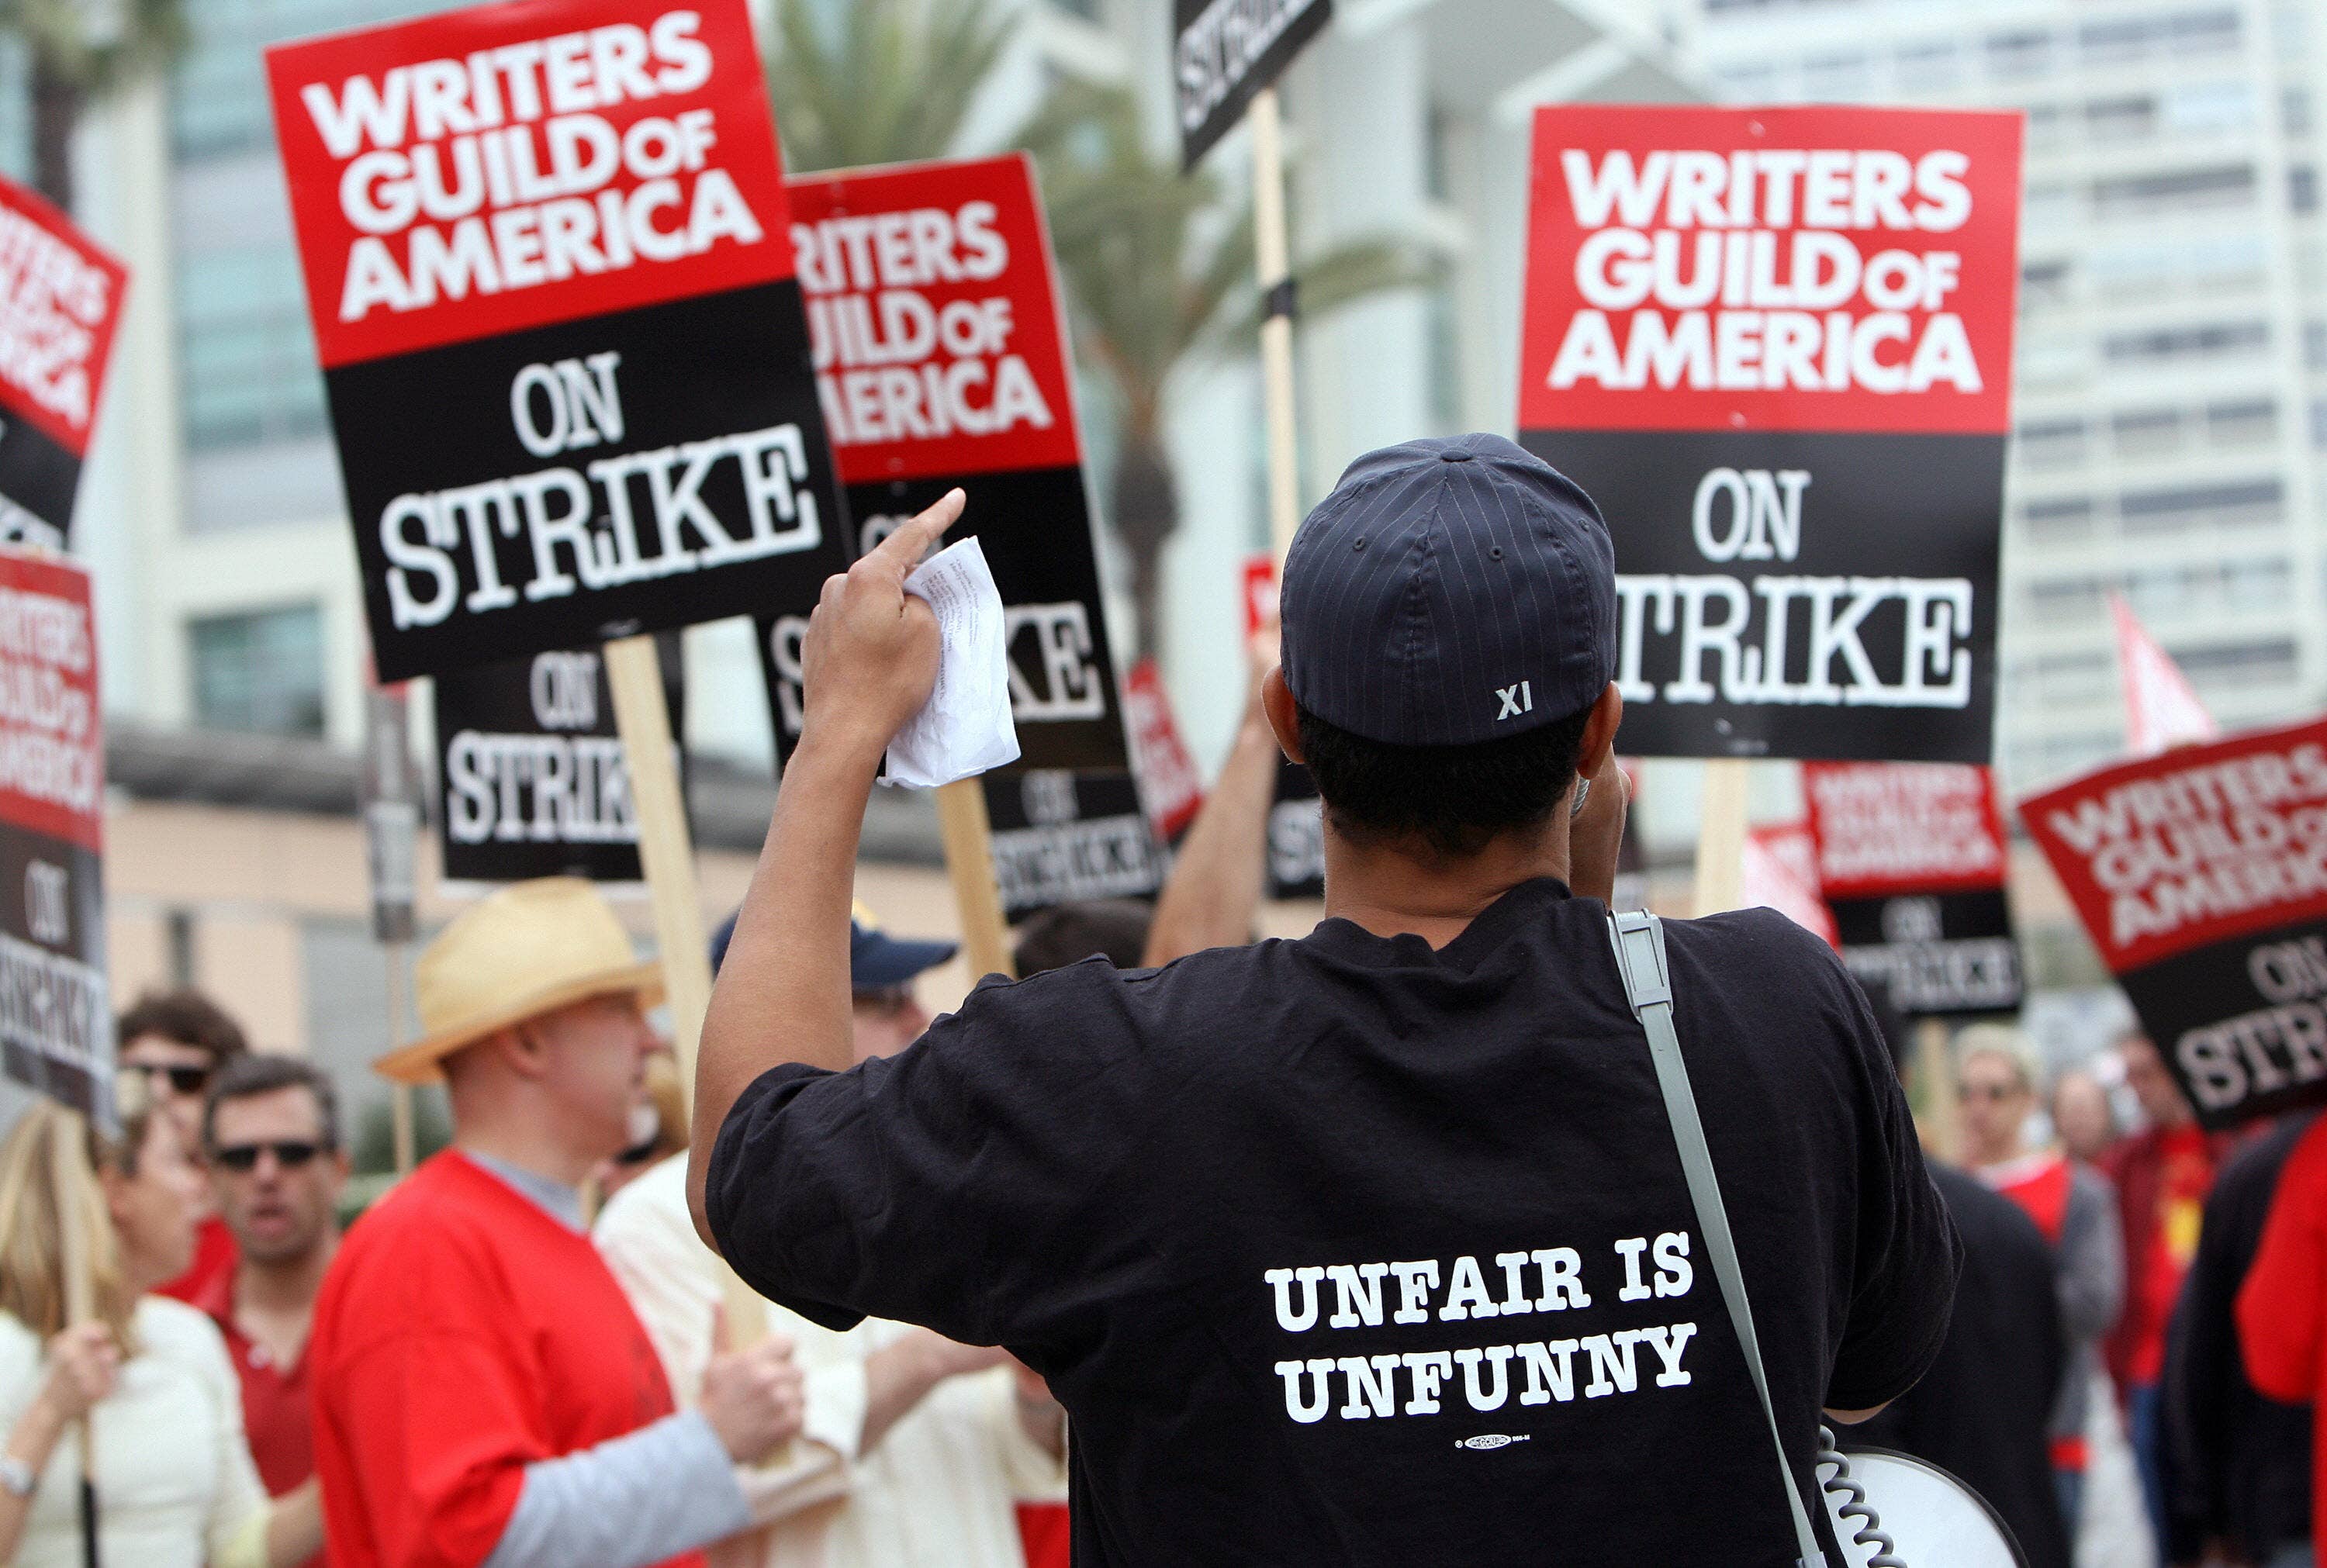 Months-long Hollywood writers strike over after contract with studios approved